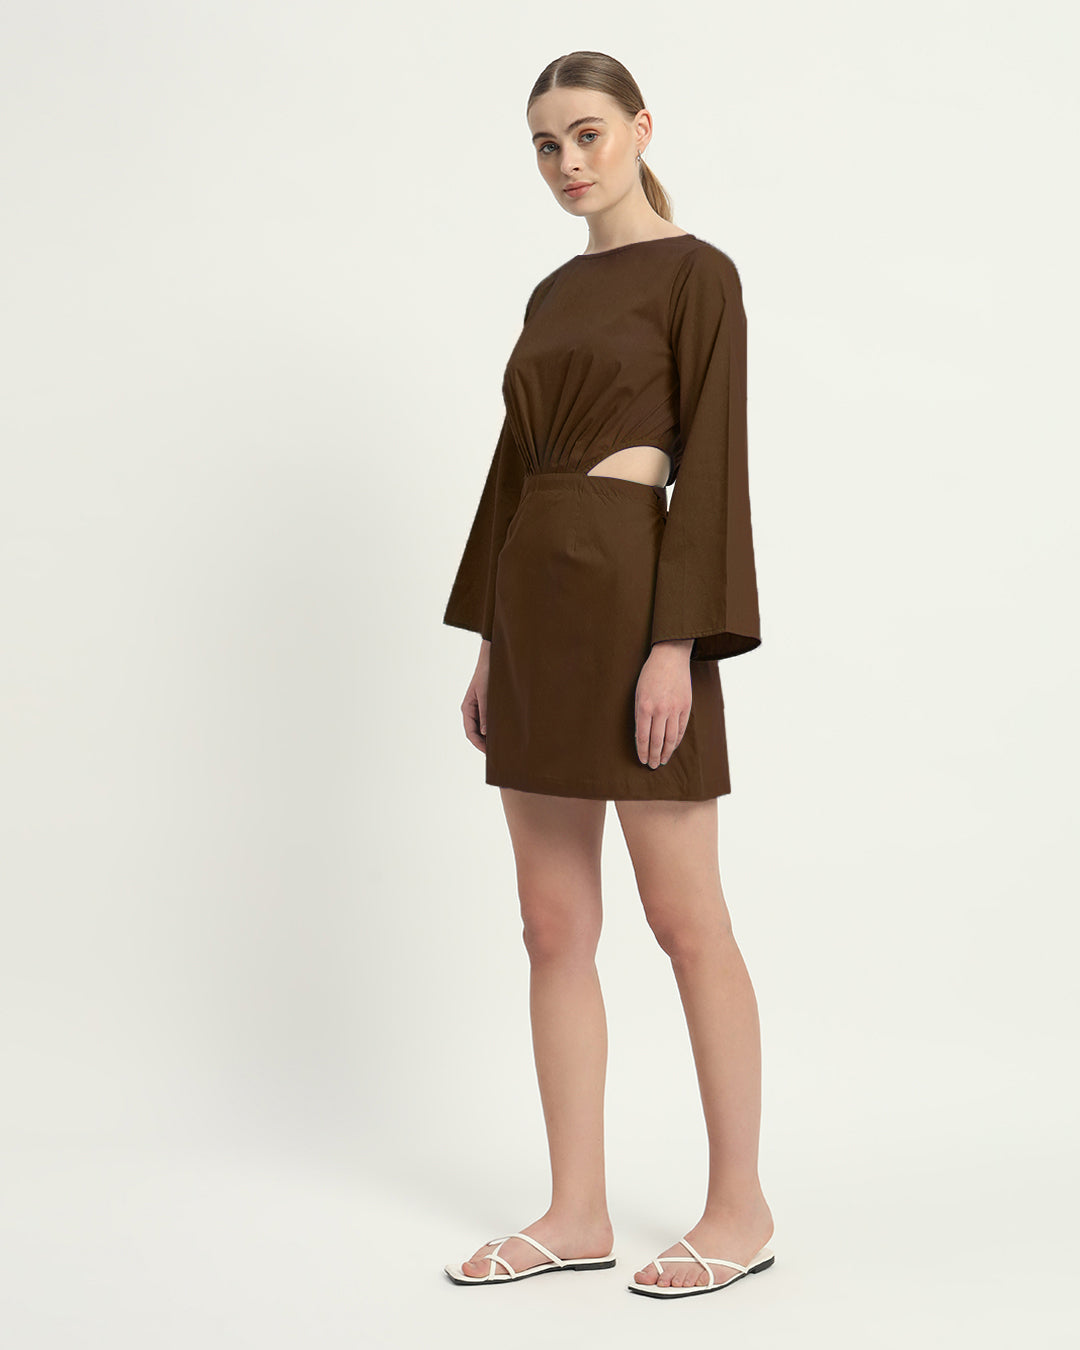 The Nutshell Eloy Cotton Dress